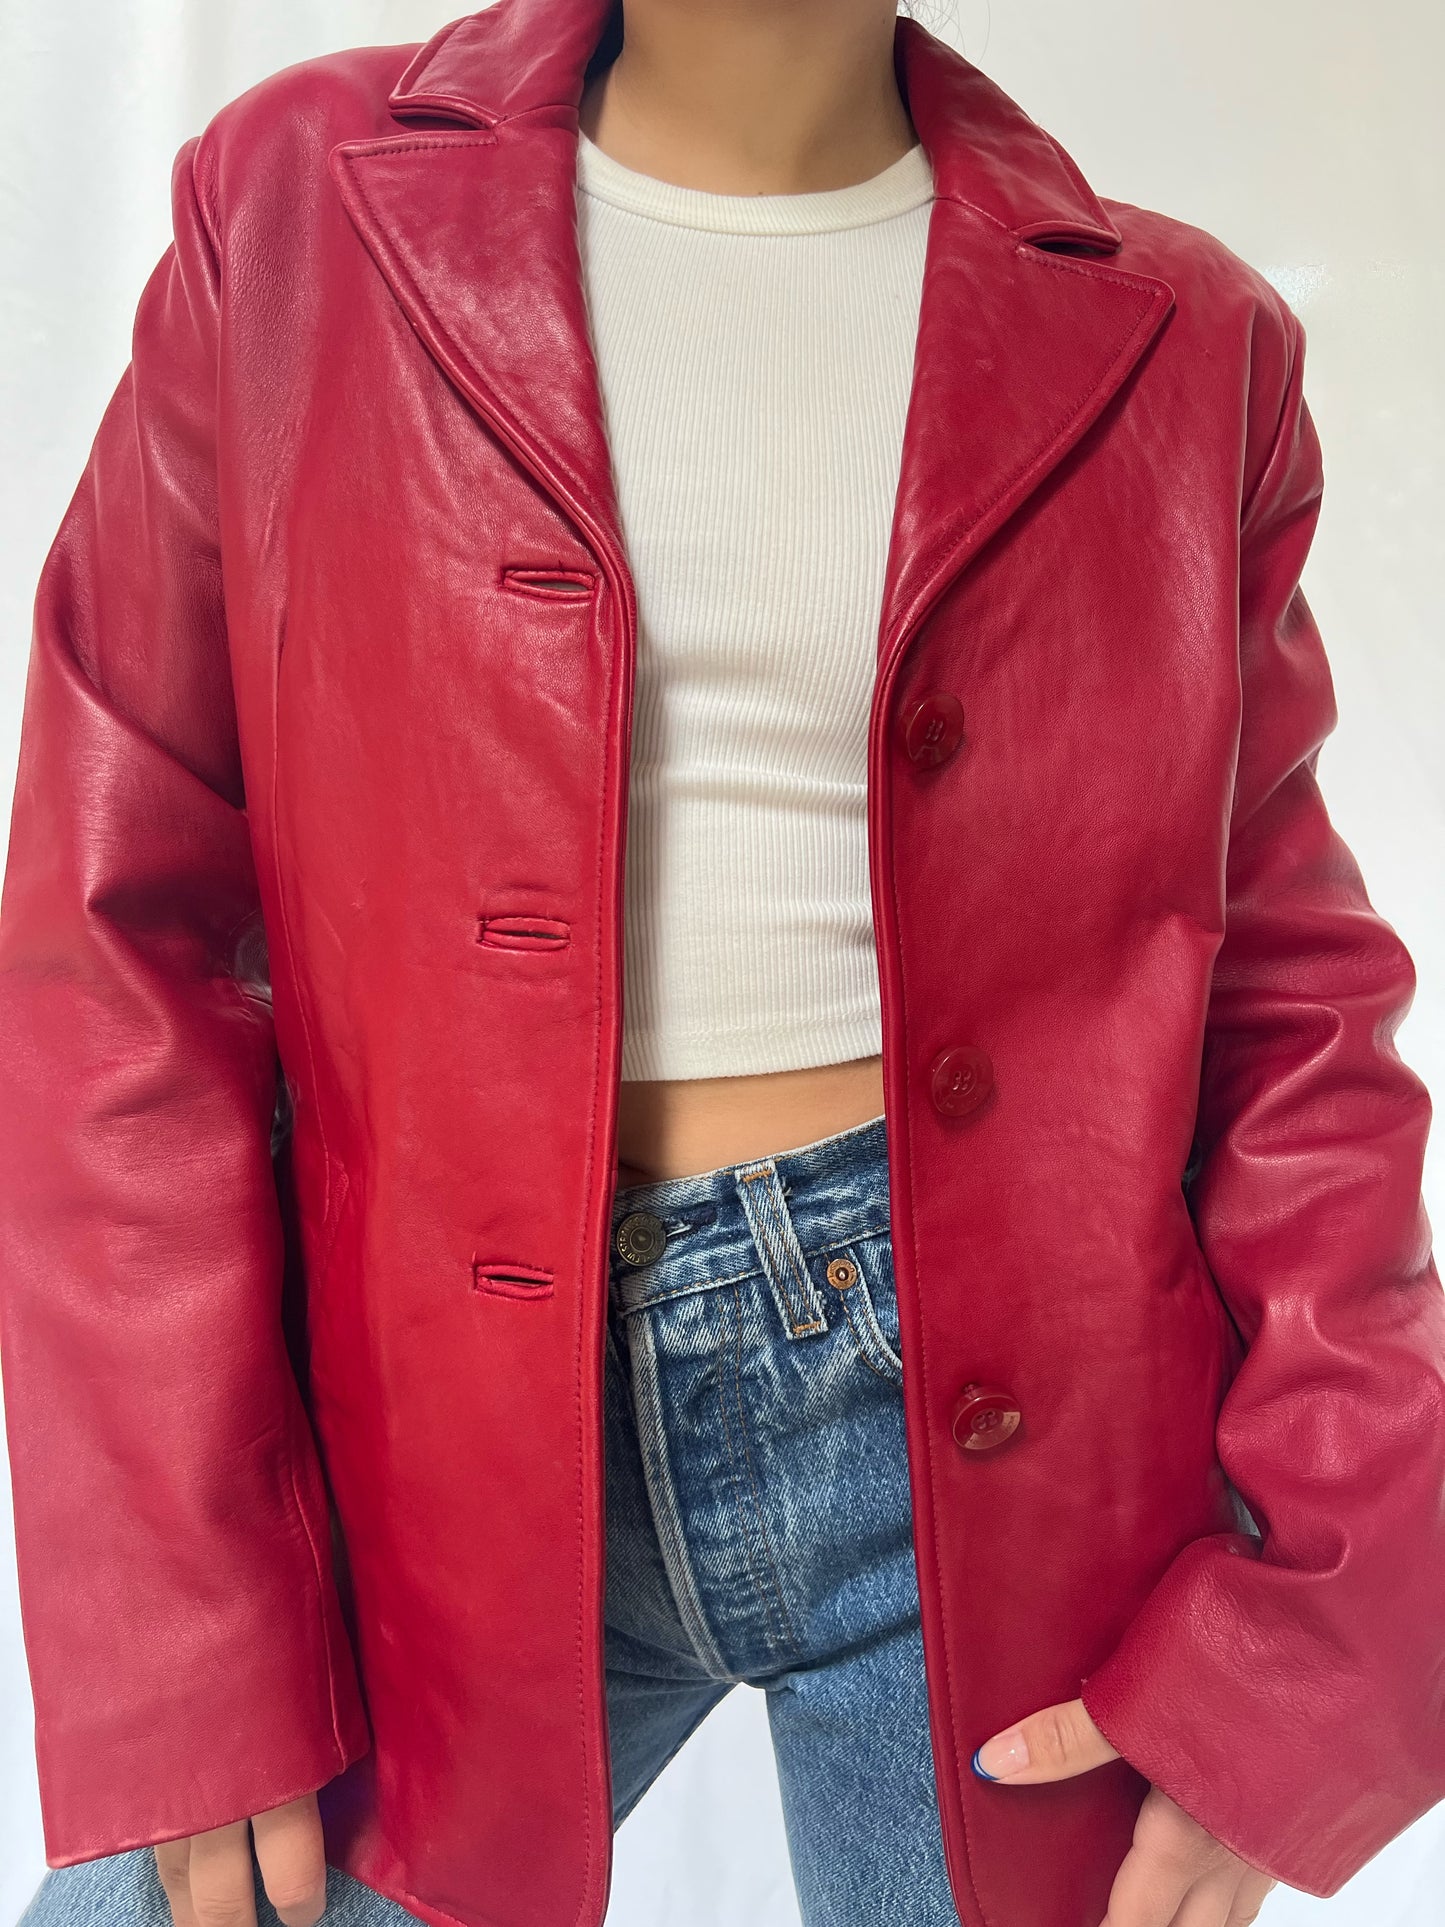 Wilsons Red Leather Jacket - M